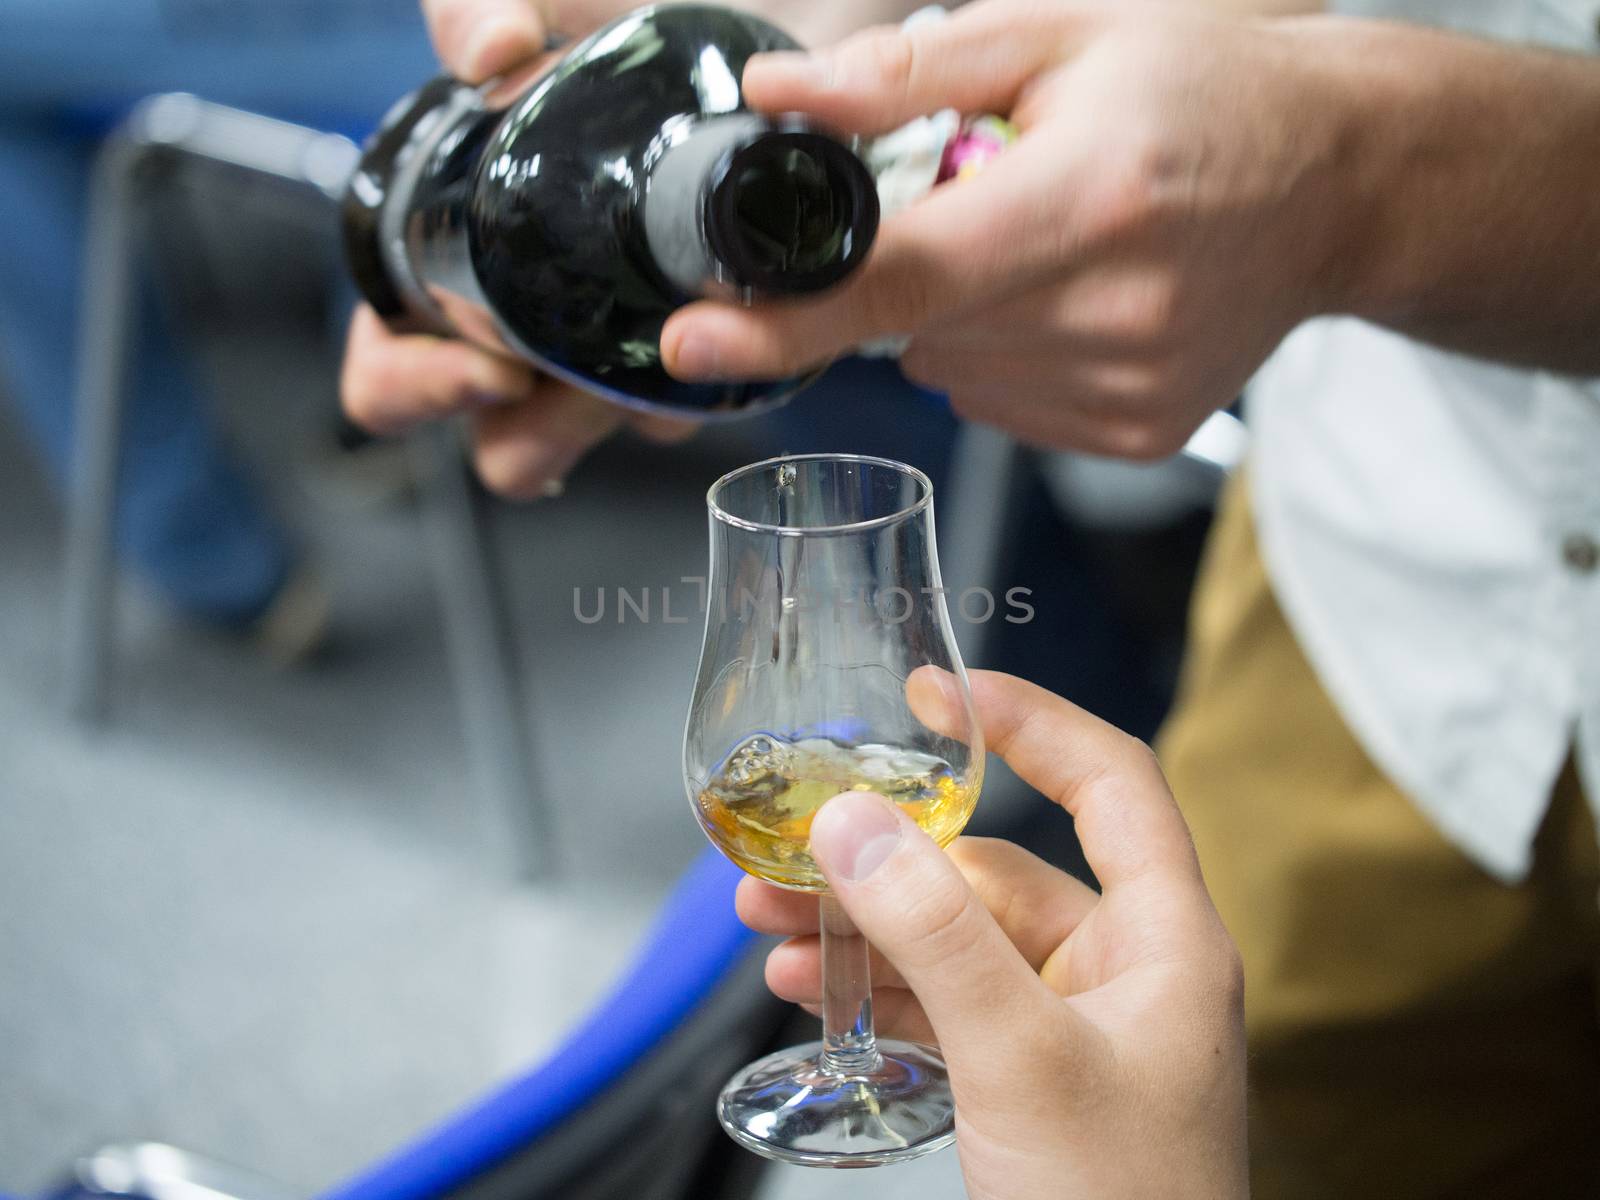 Hand holding a snifter glass filled with whisky, whisky tasting event